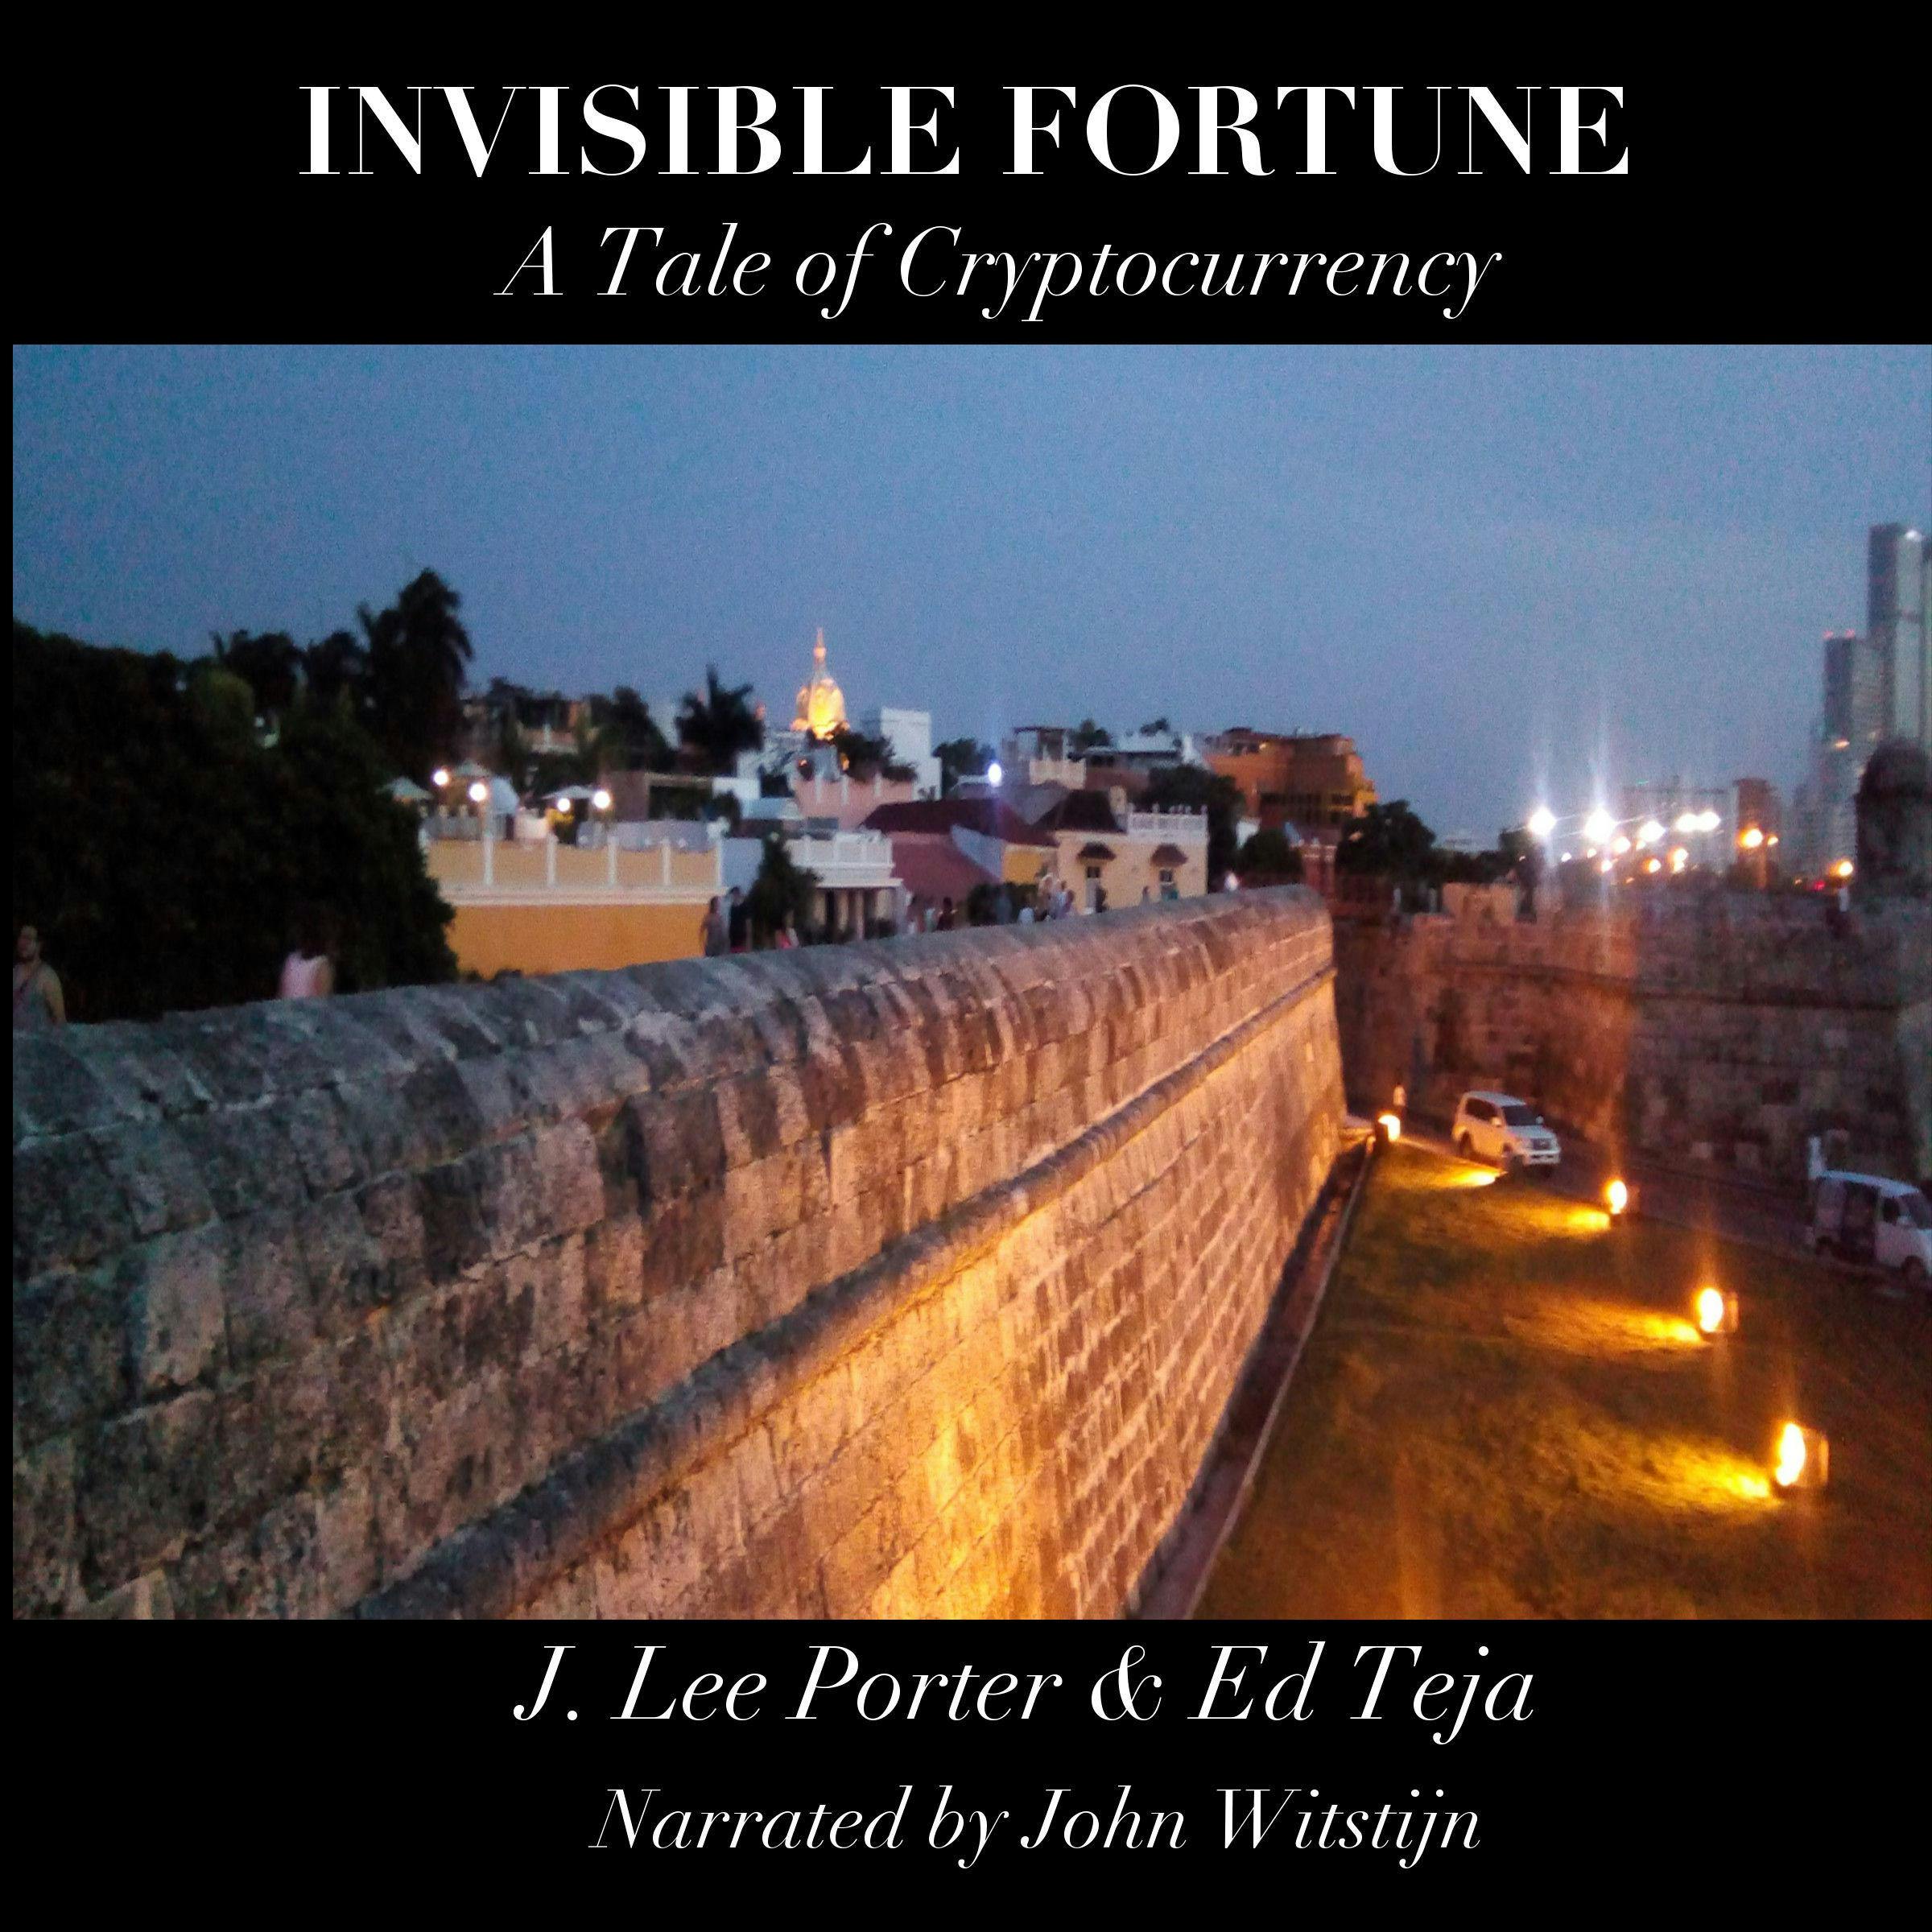 Invisible Fortune: A Tale of Cryptocurrency - Ed Teja, J. Lee Porter